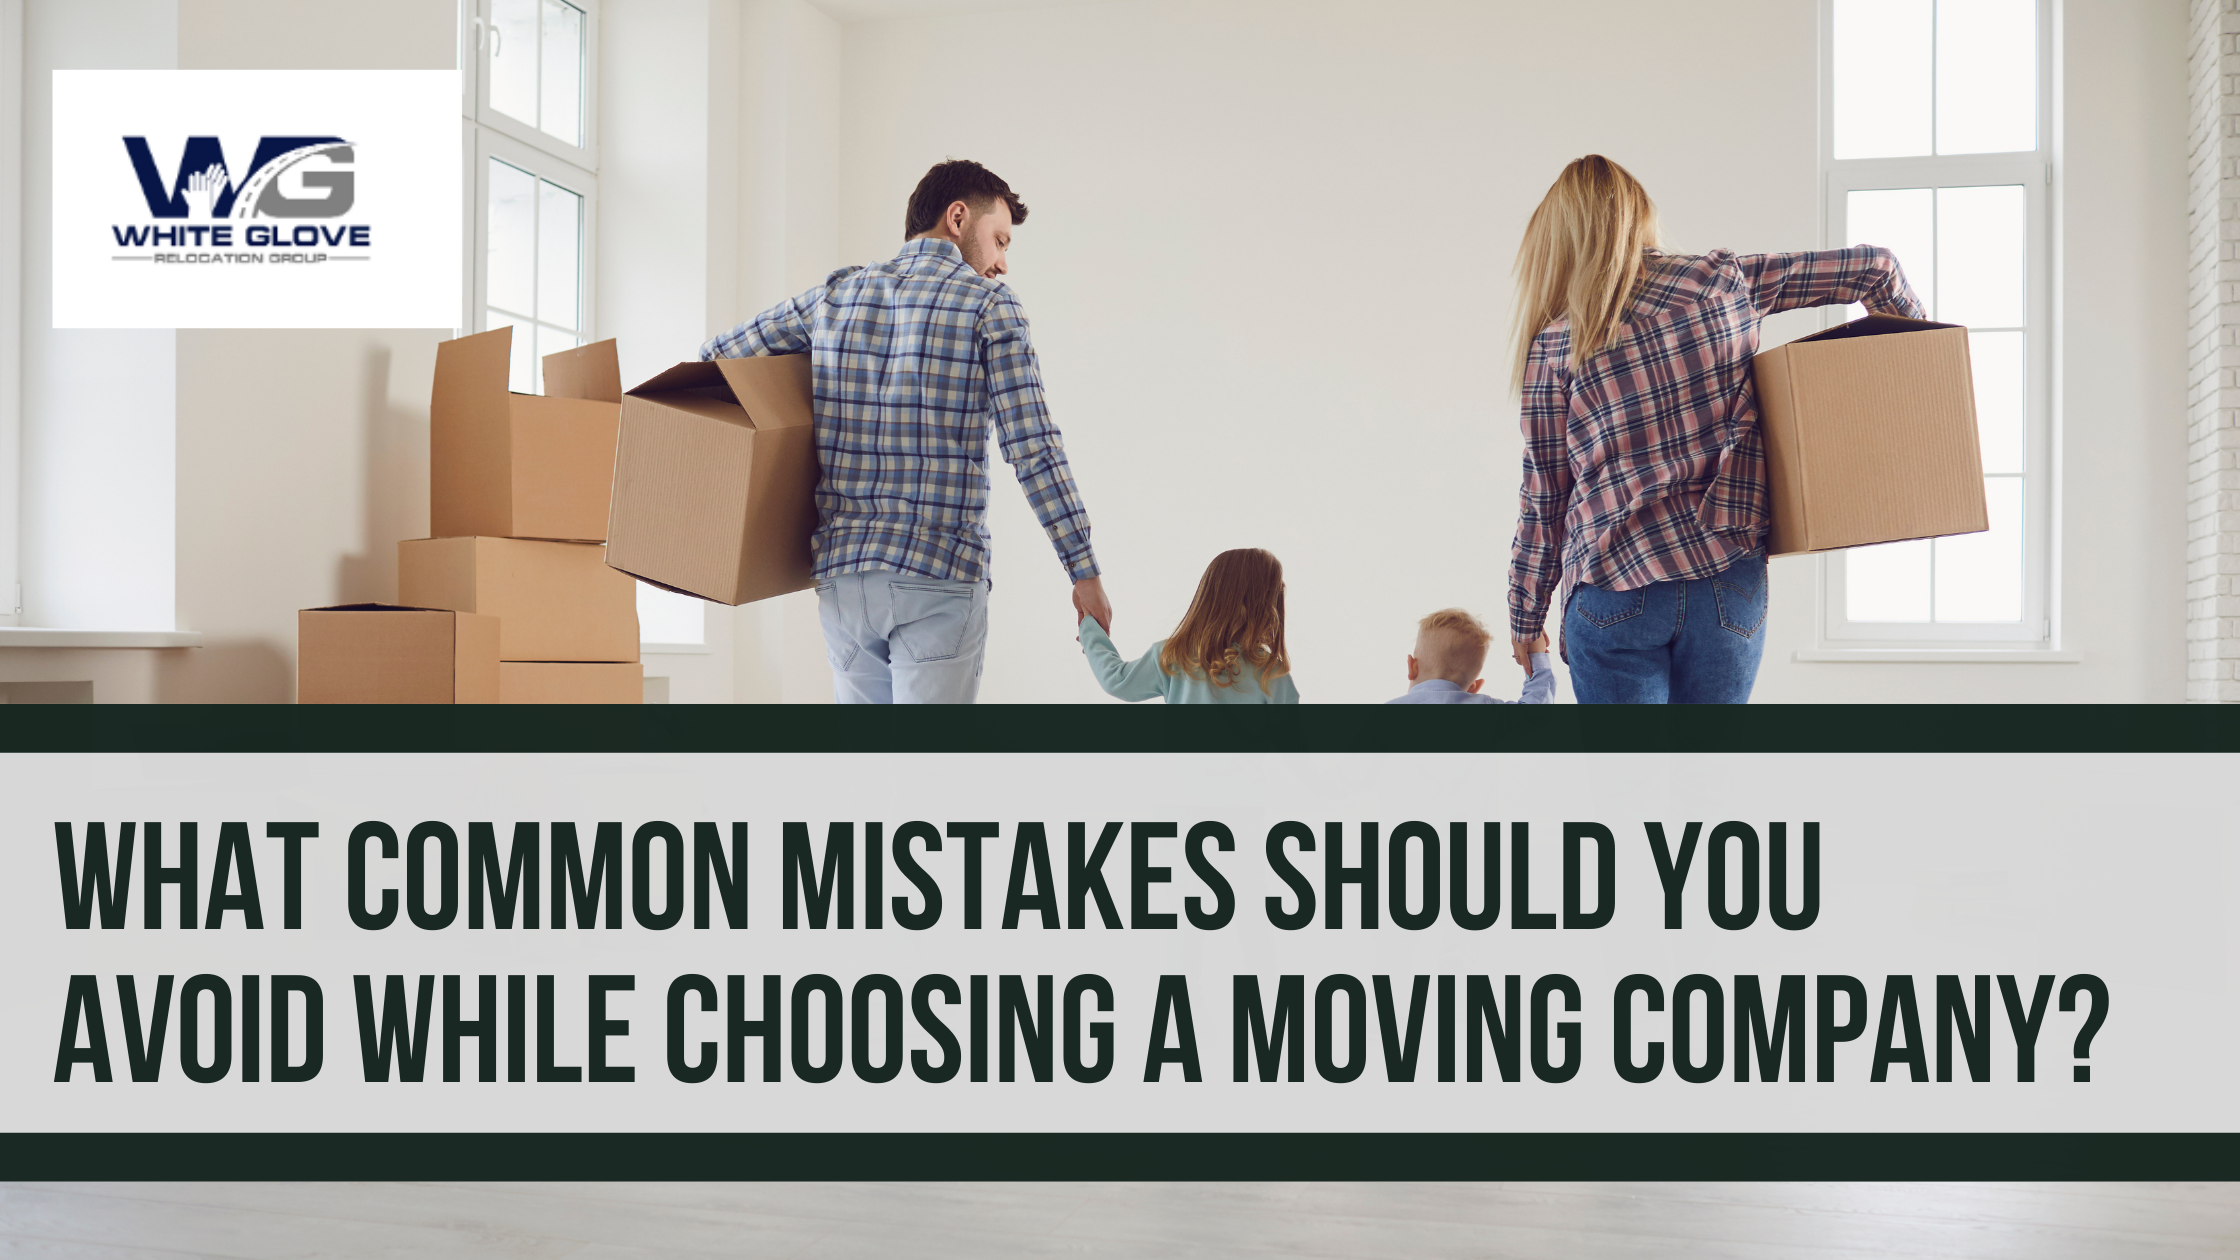 What Common Mistakes Should You Avoid While Choosing a Moving Company?